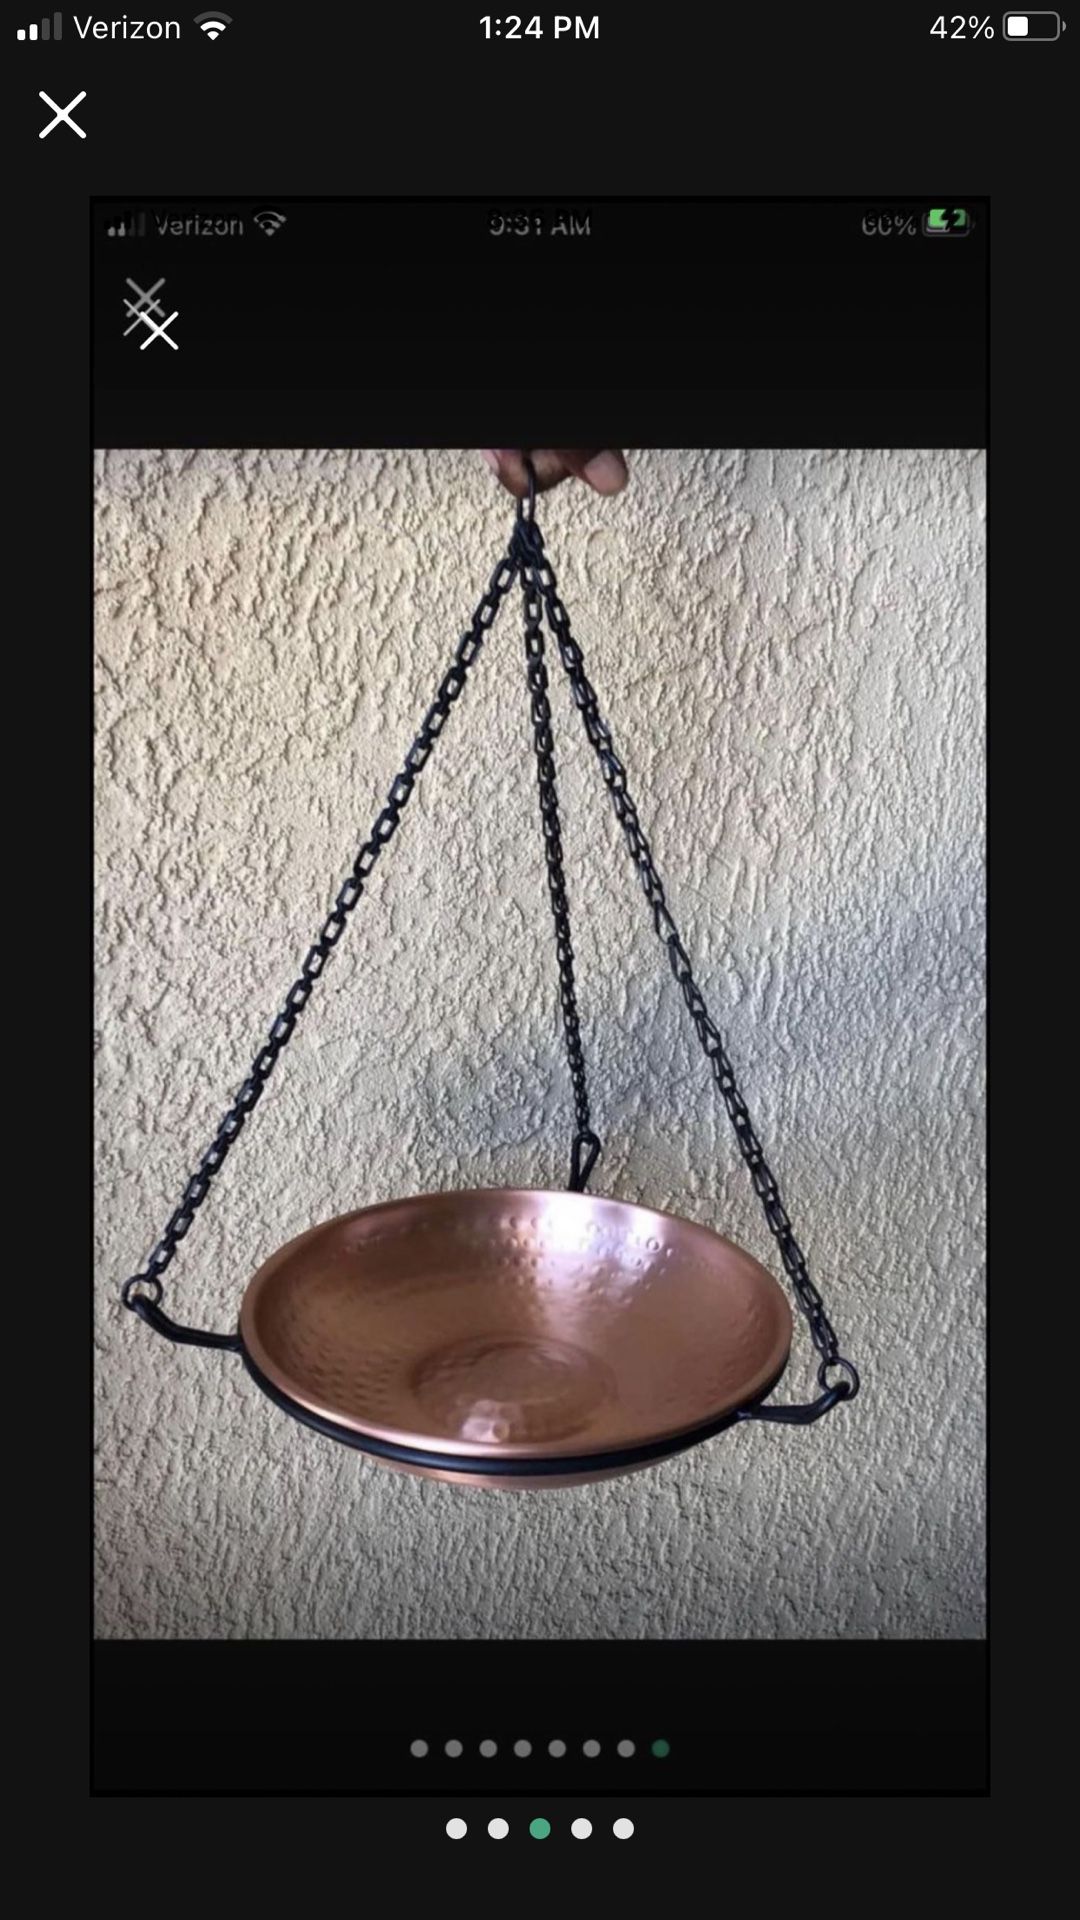 Plants 1 holder,heavy chains with coper coding plate, 17” Leigh and 11” across, new, never used, PRICE FIRM $20! Pick Up West 79912